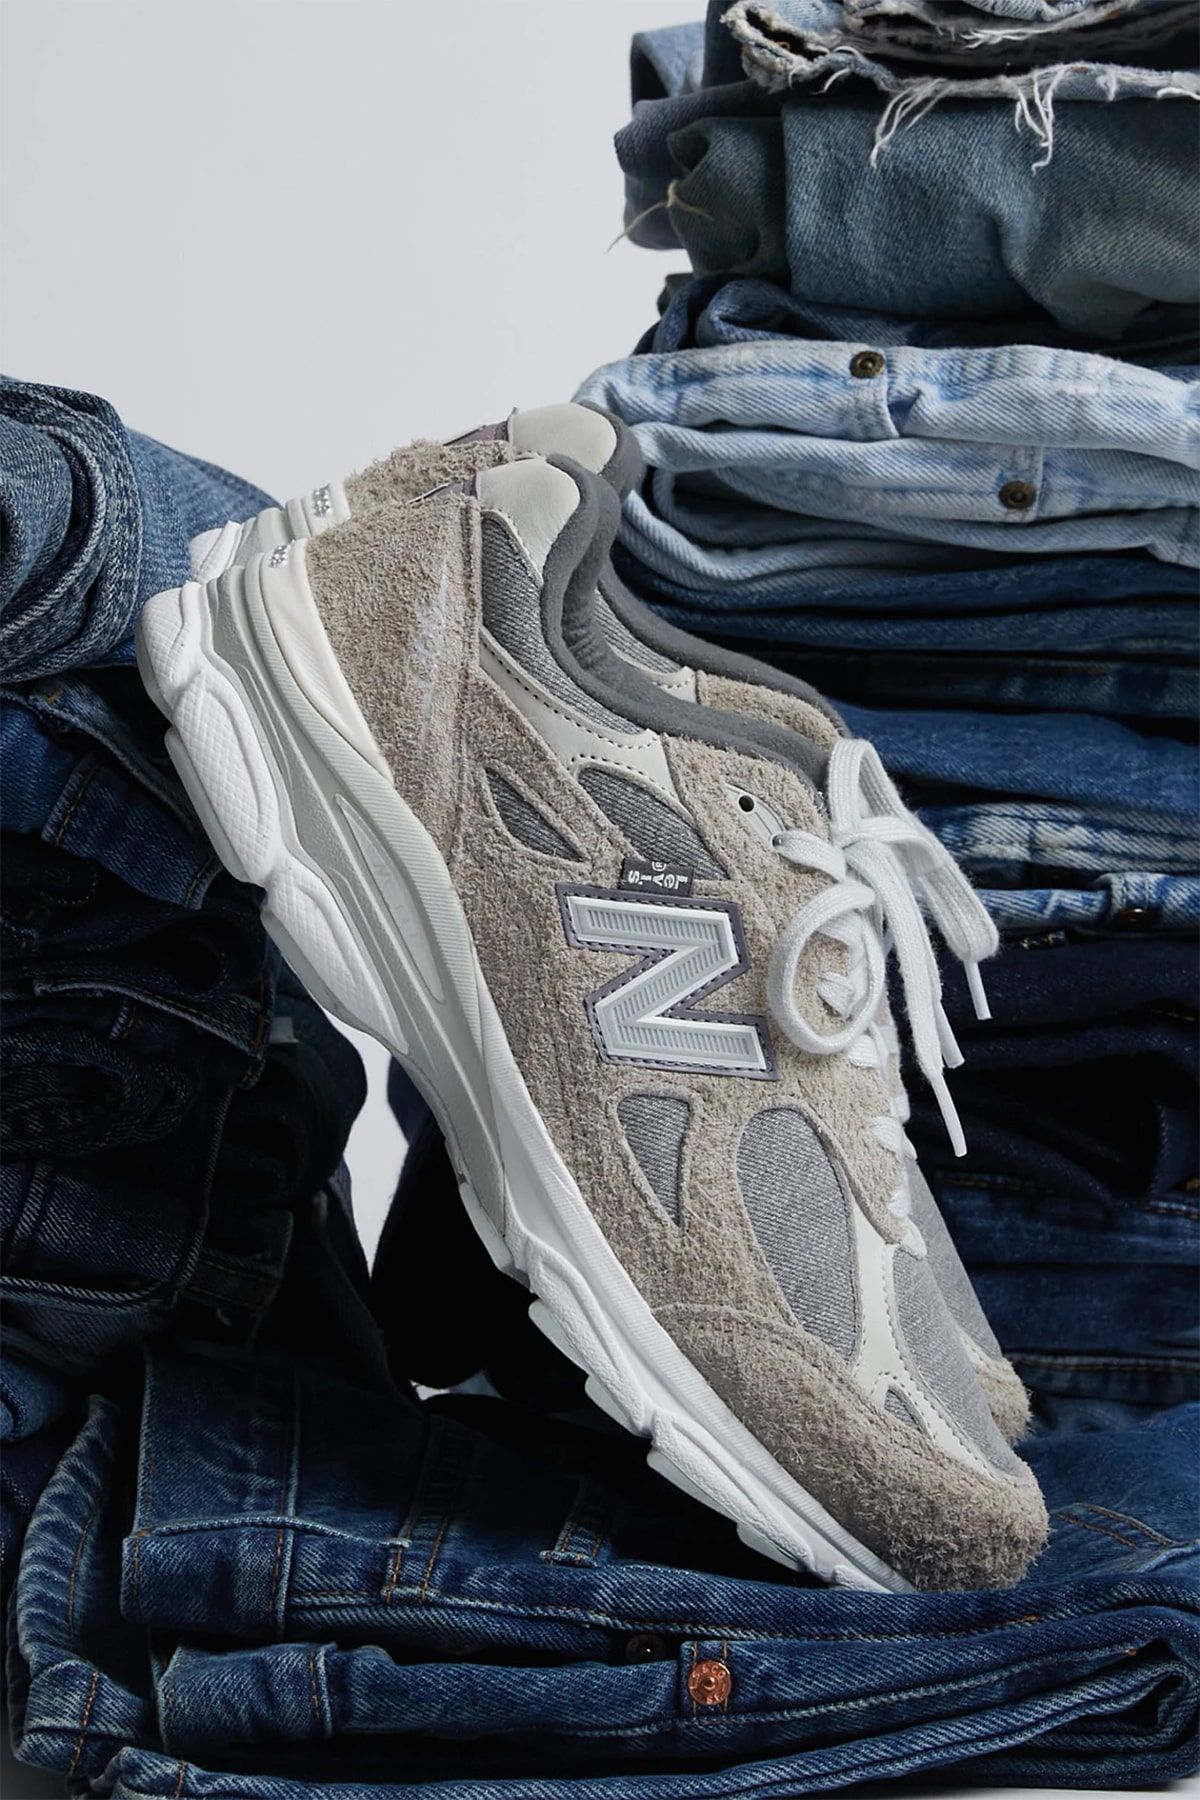 Levi's x New Balance 990v3 Pack Drops September 9th | House of Heat°